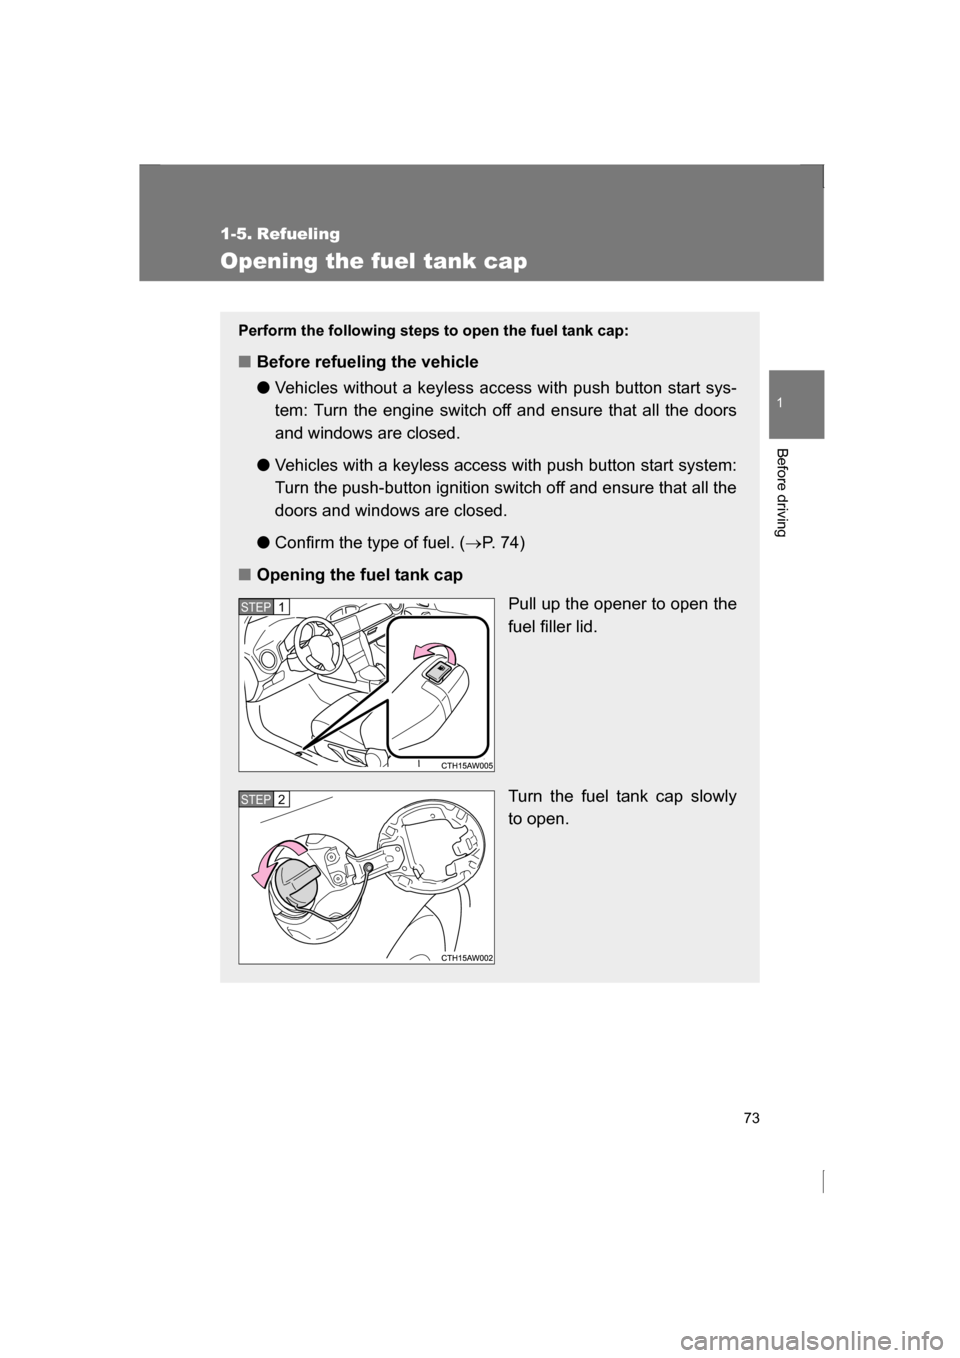 SUBARU BRZ 2013 1.G Manual PDF 73
1
Before driving
1-5. Refueling 
Opening the fuel tank cap
Perform the following steps to open the fuel tank cap:
■Before refueling the vehicle ●Vehicles without a keyless access with push butt